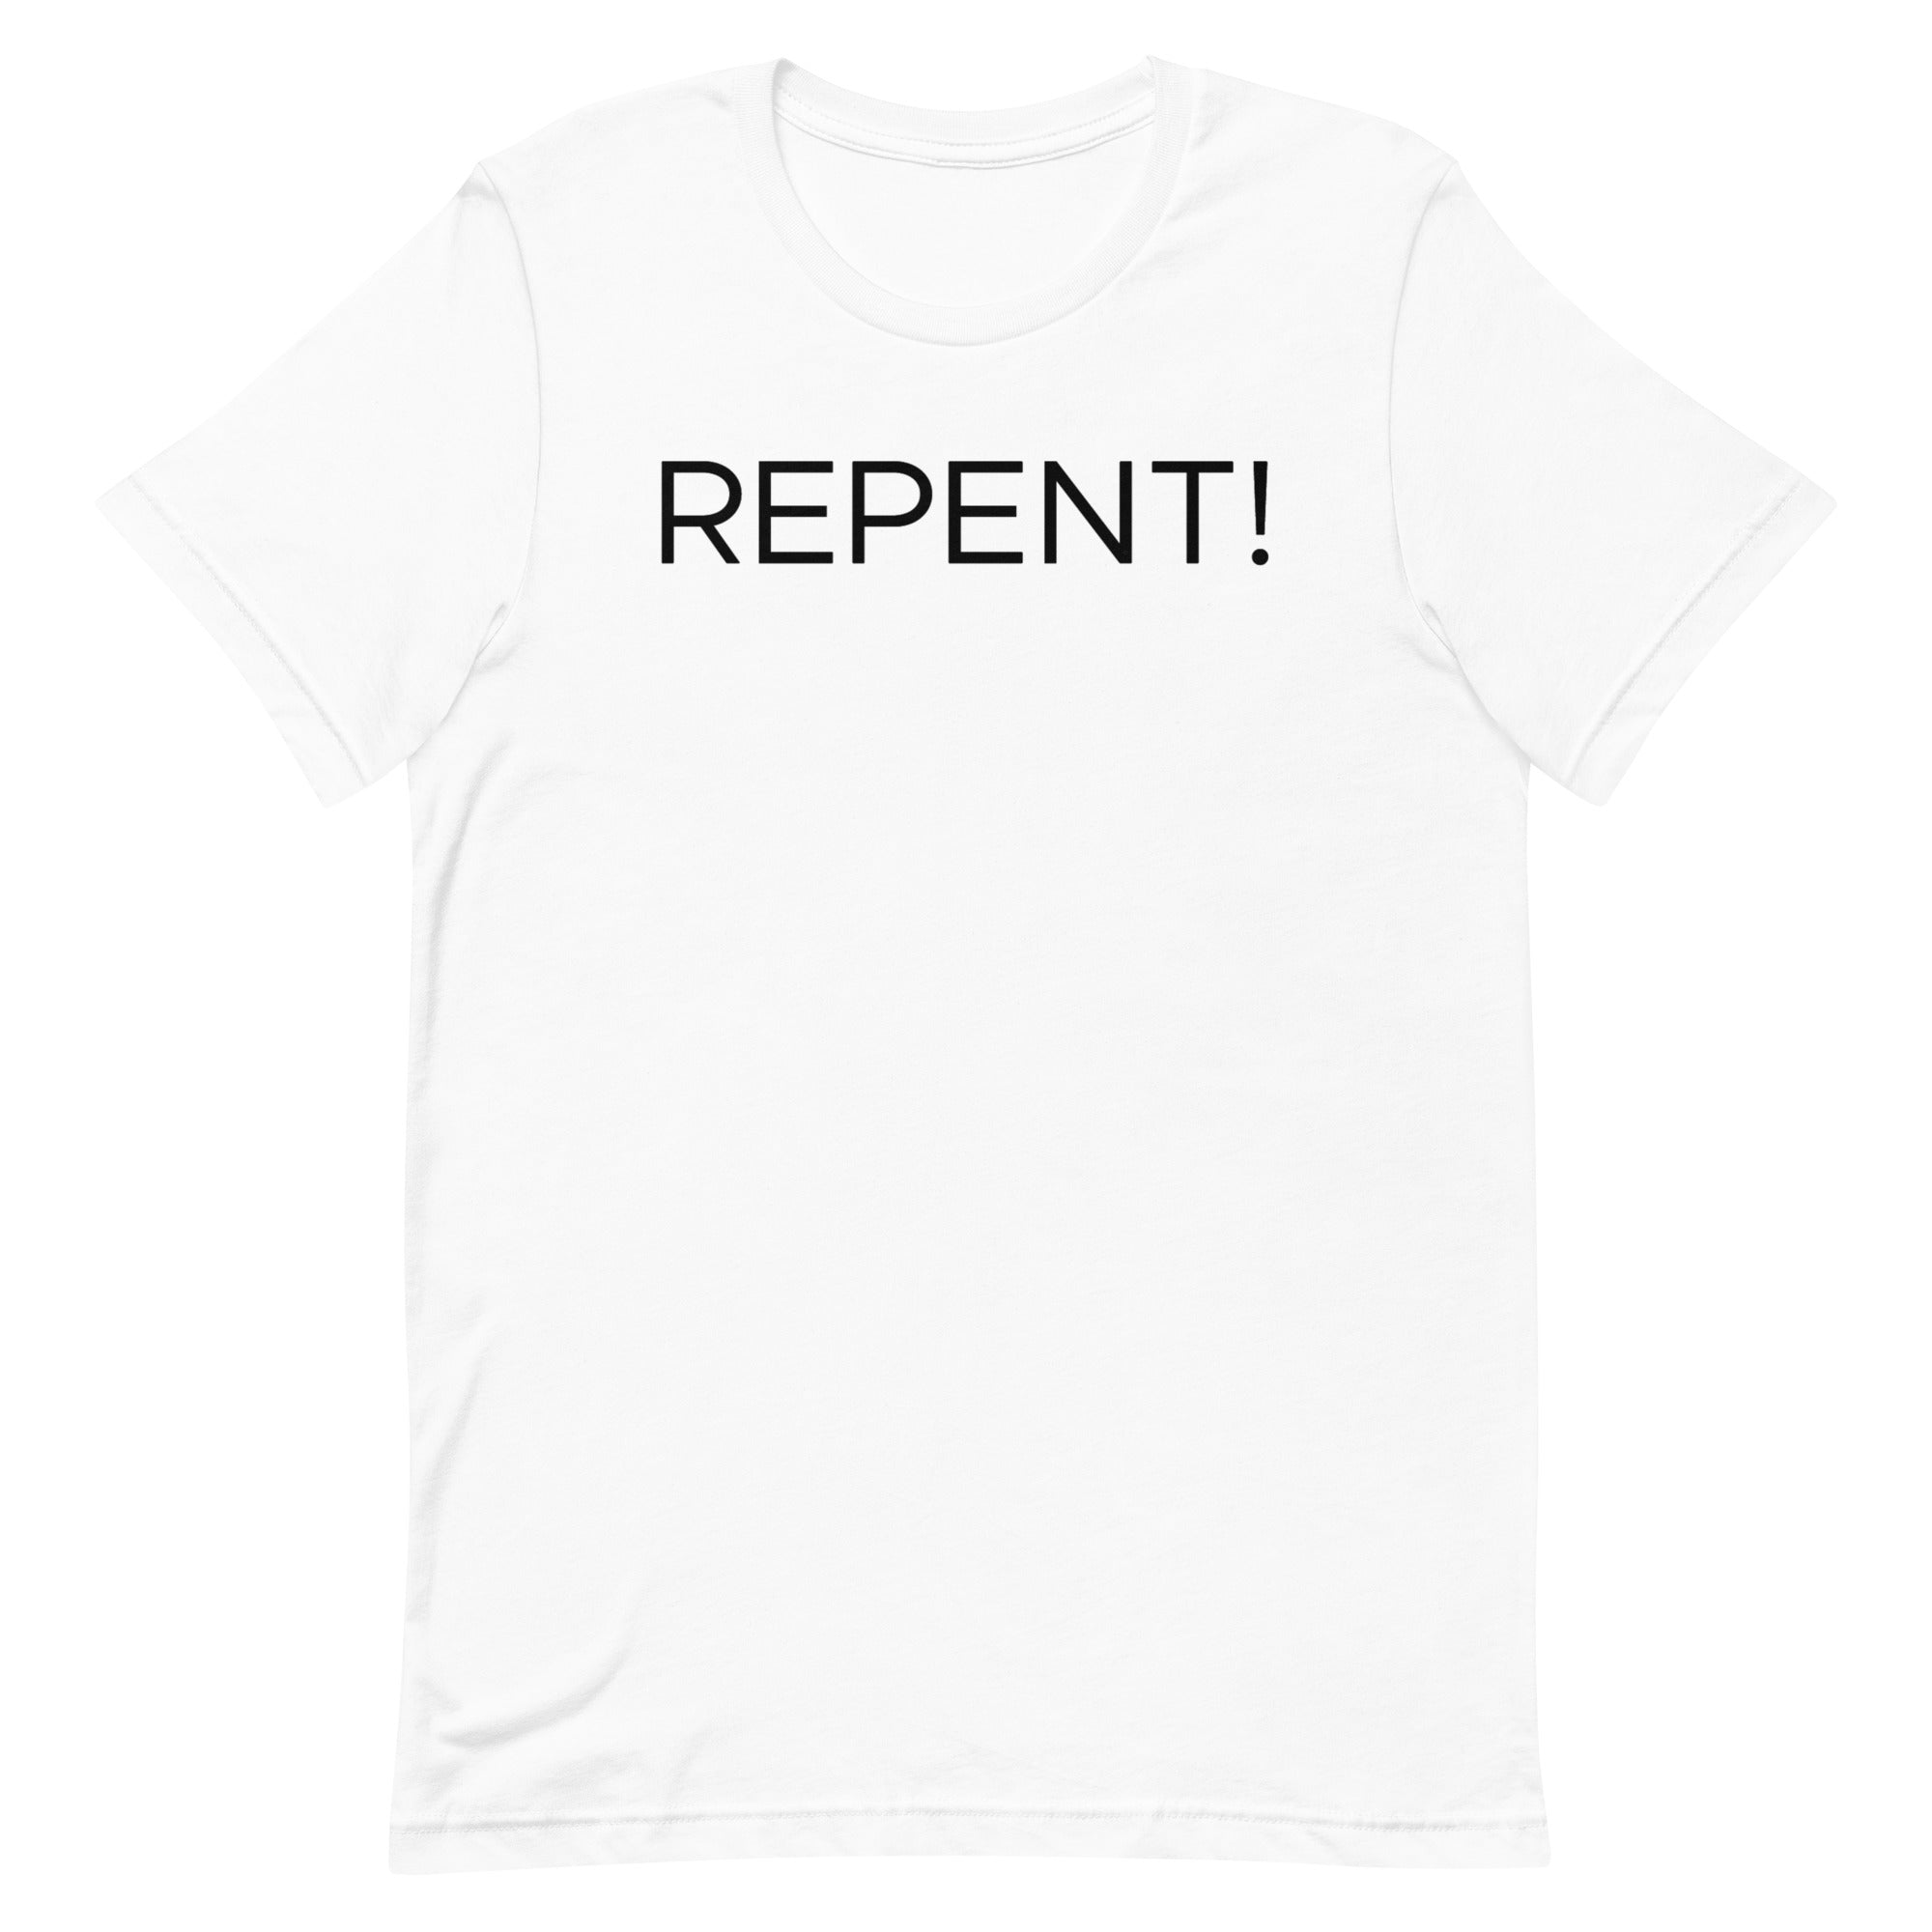 REPENT UNISEX FRONT AND BACK T-SHIRT